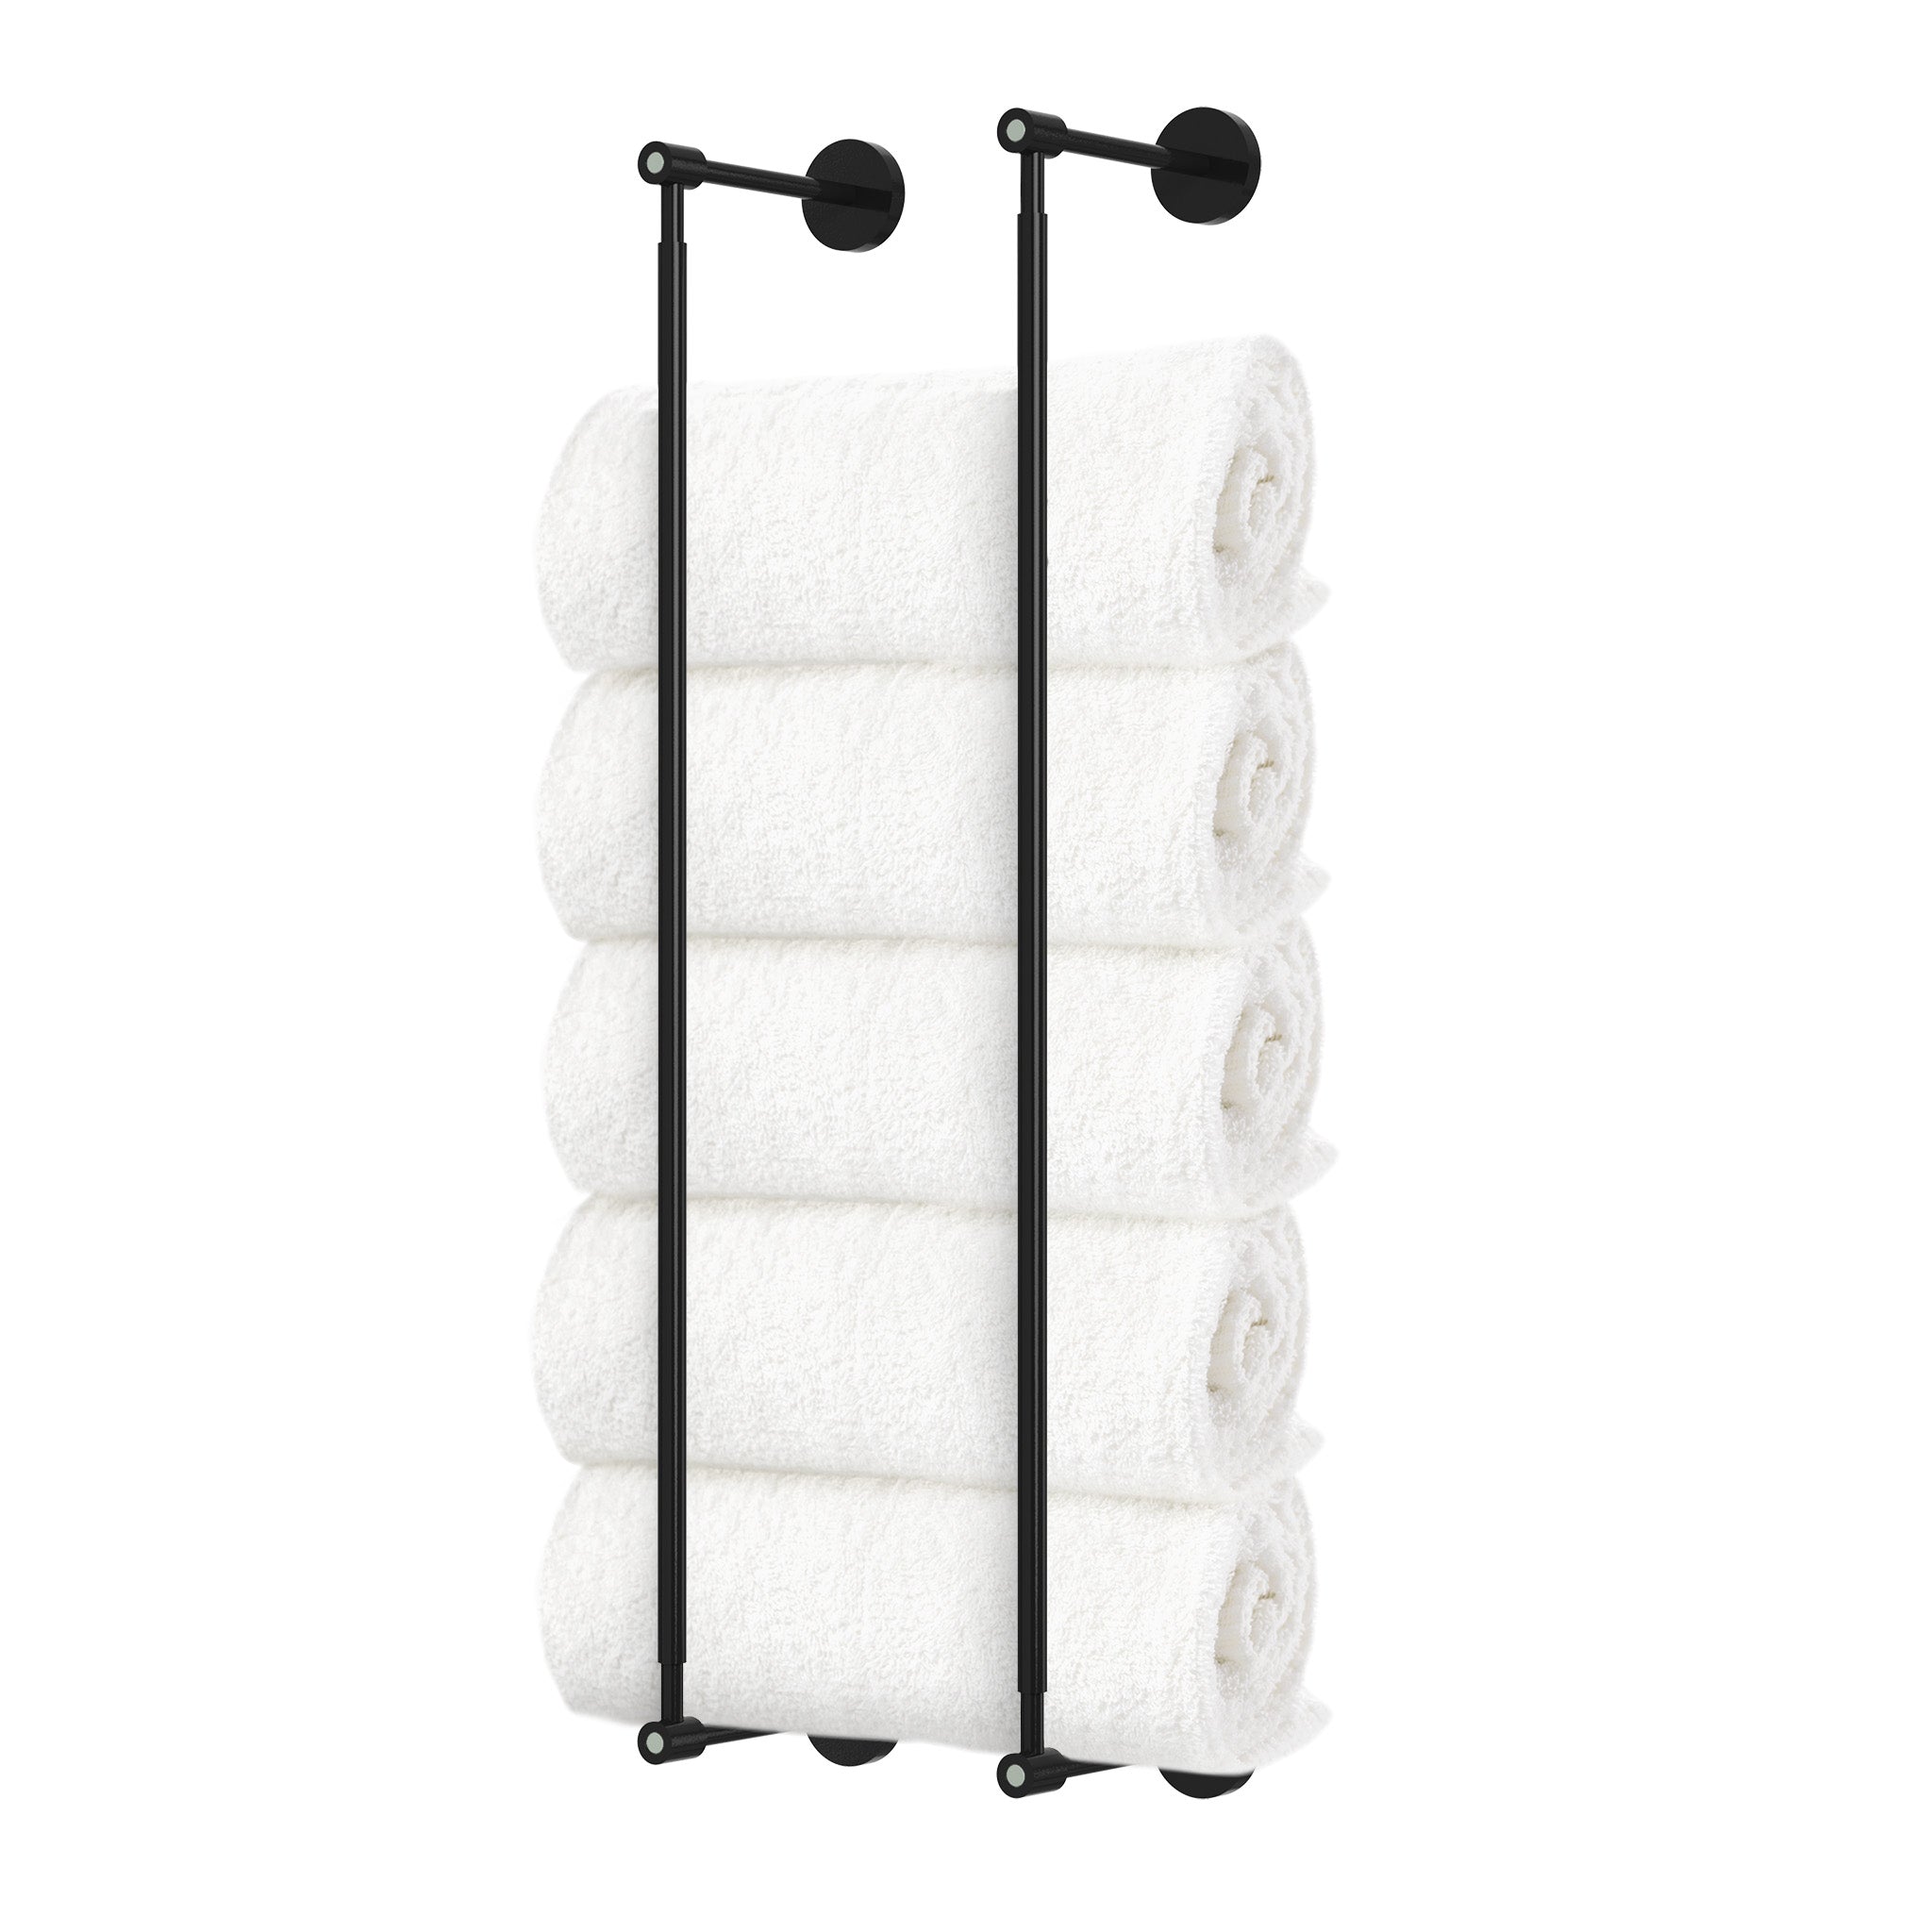 Black and spa head towel rack 24 inch dutton brown hardware